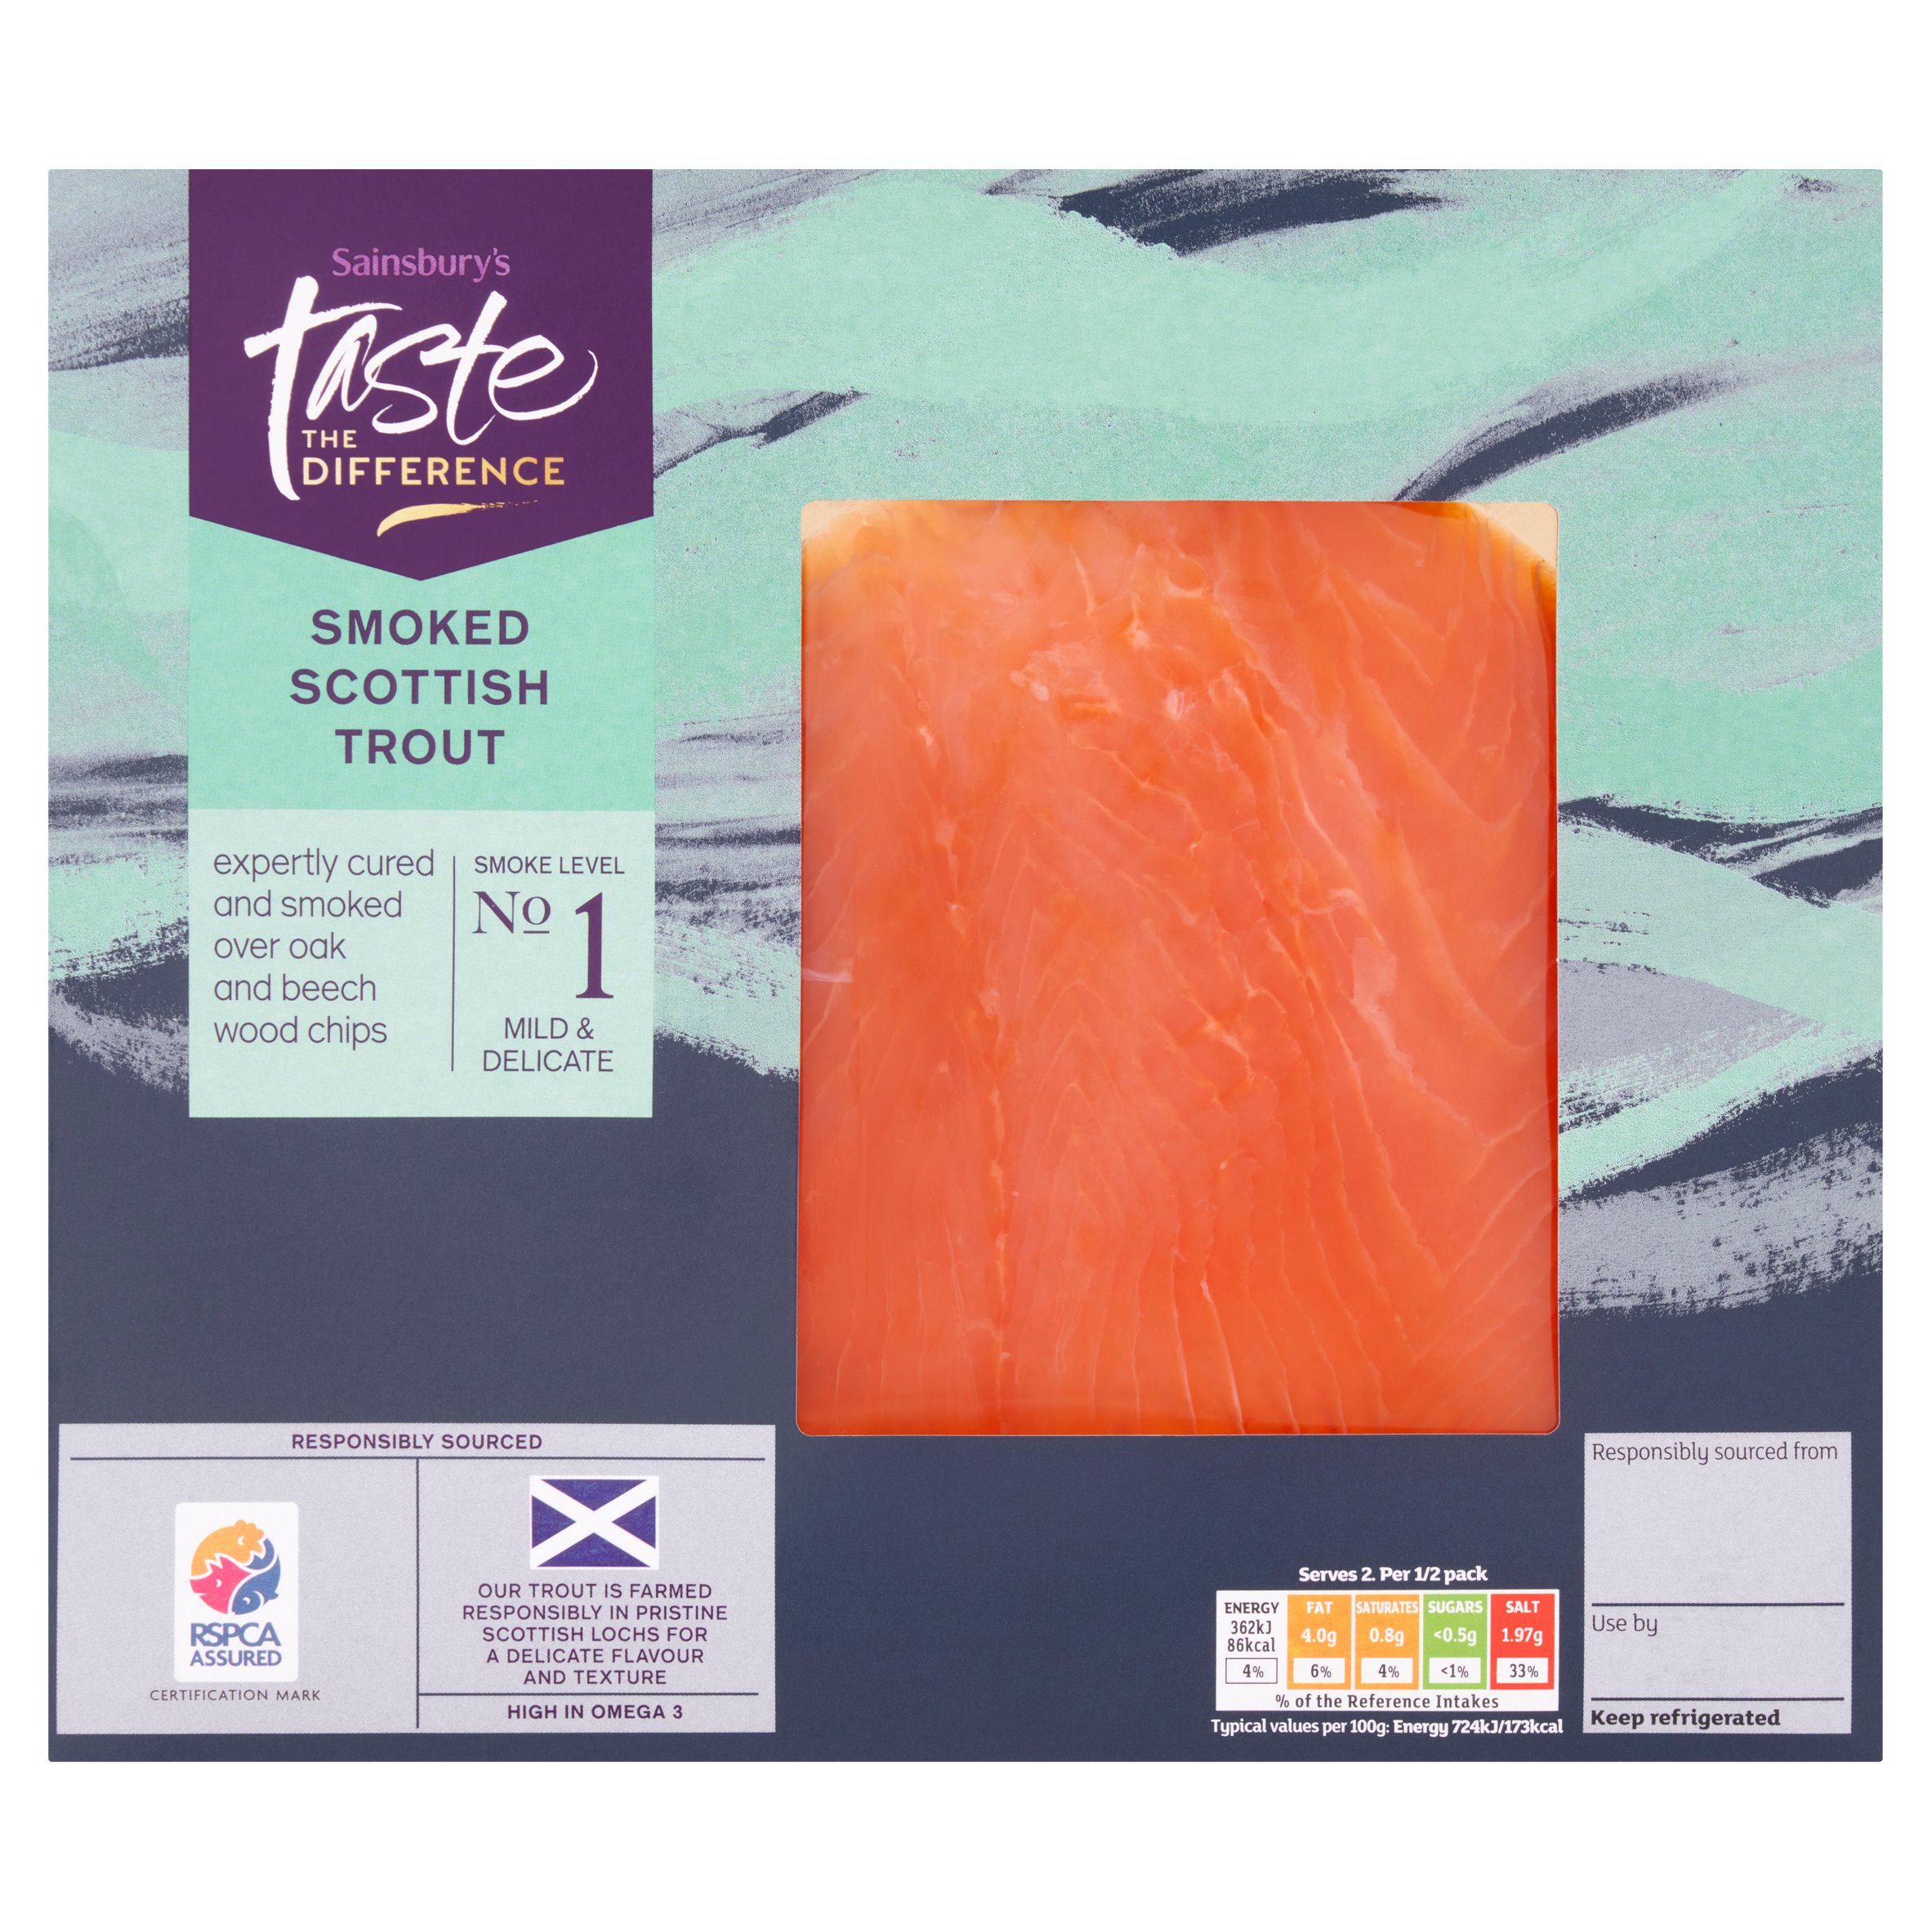 Sainsbury's Smoked Trout, Taste the Difference